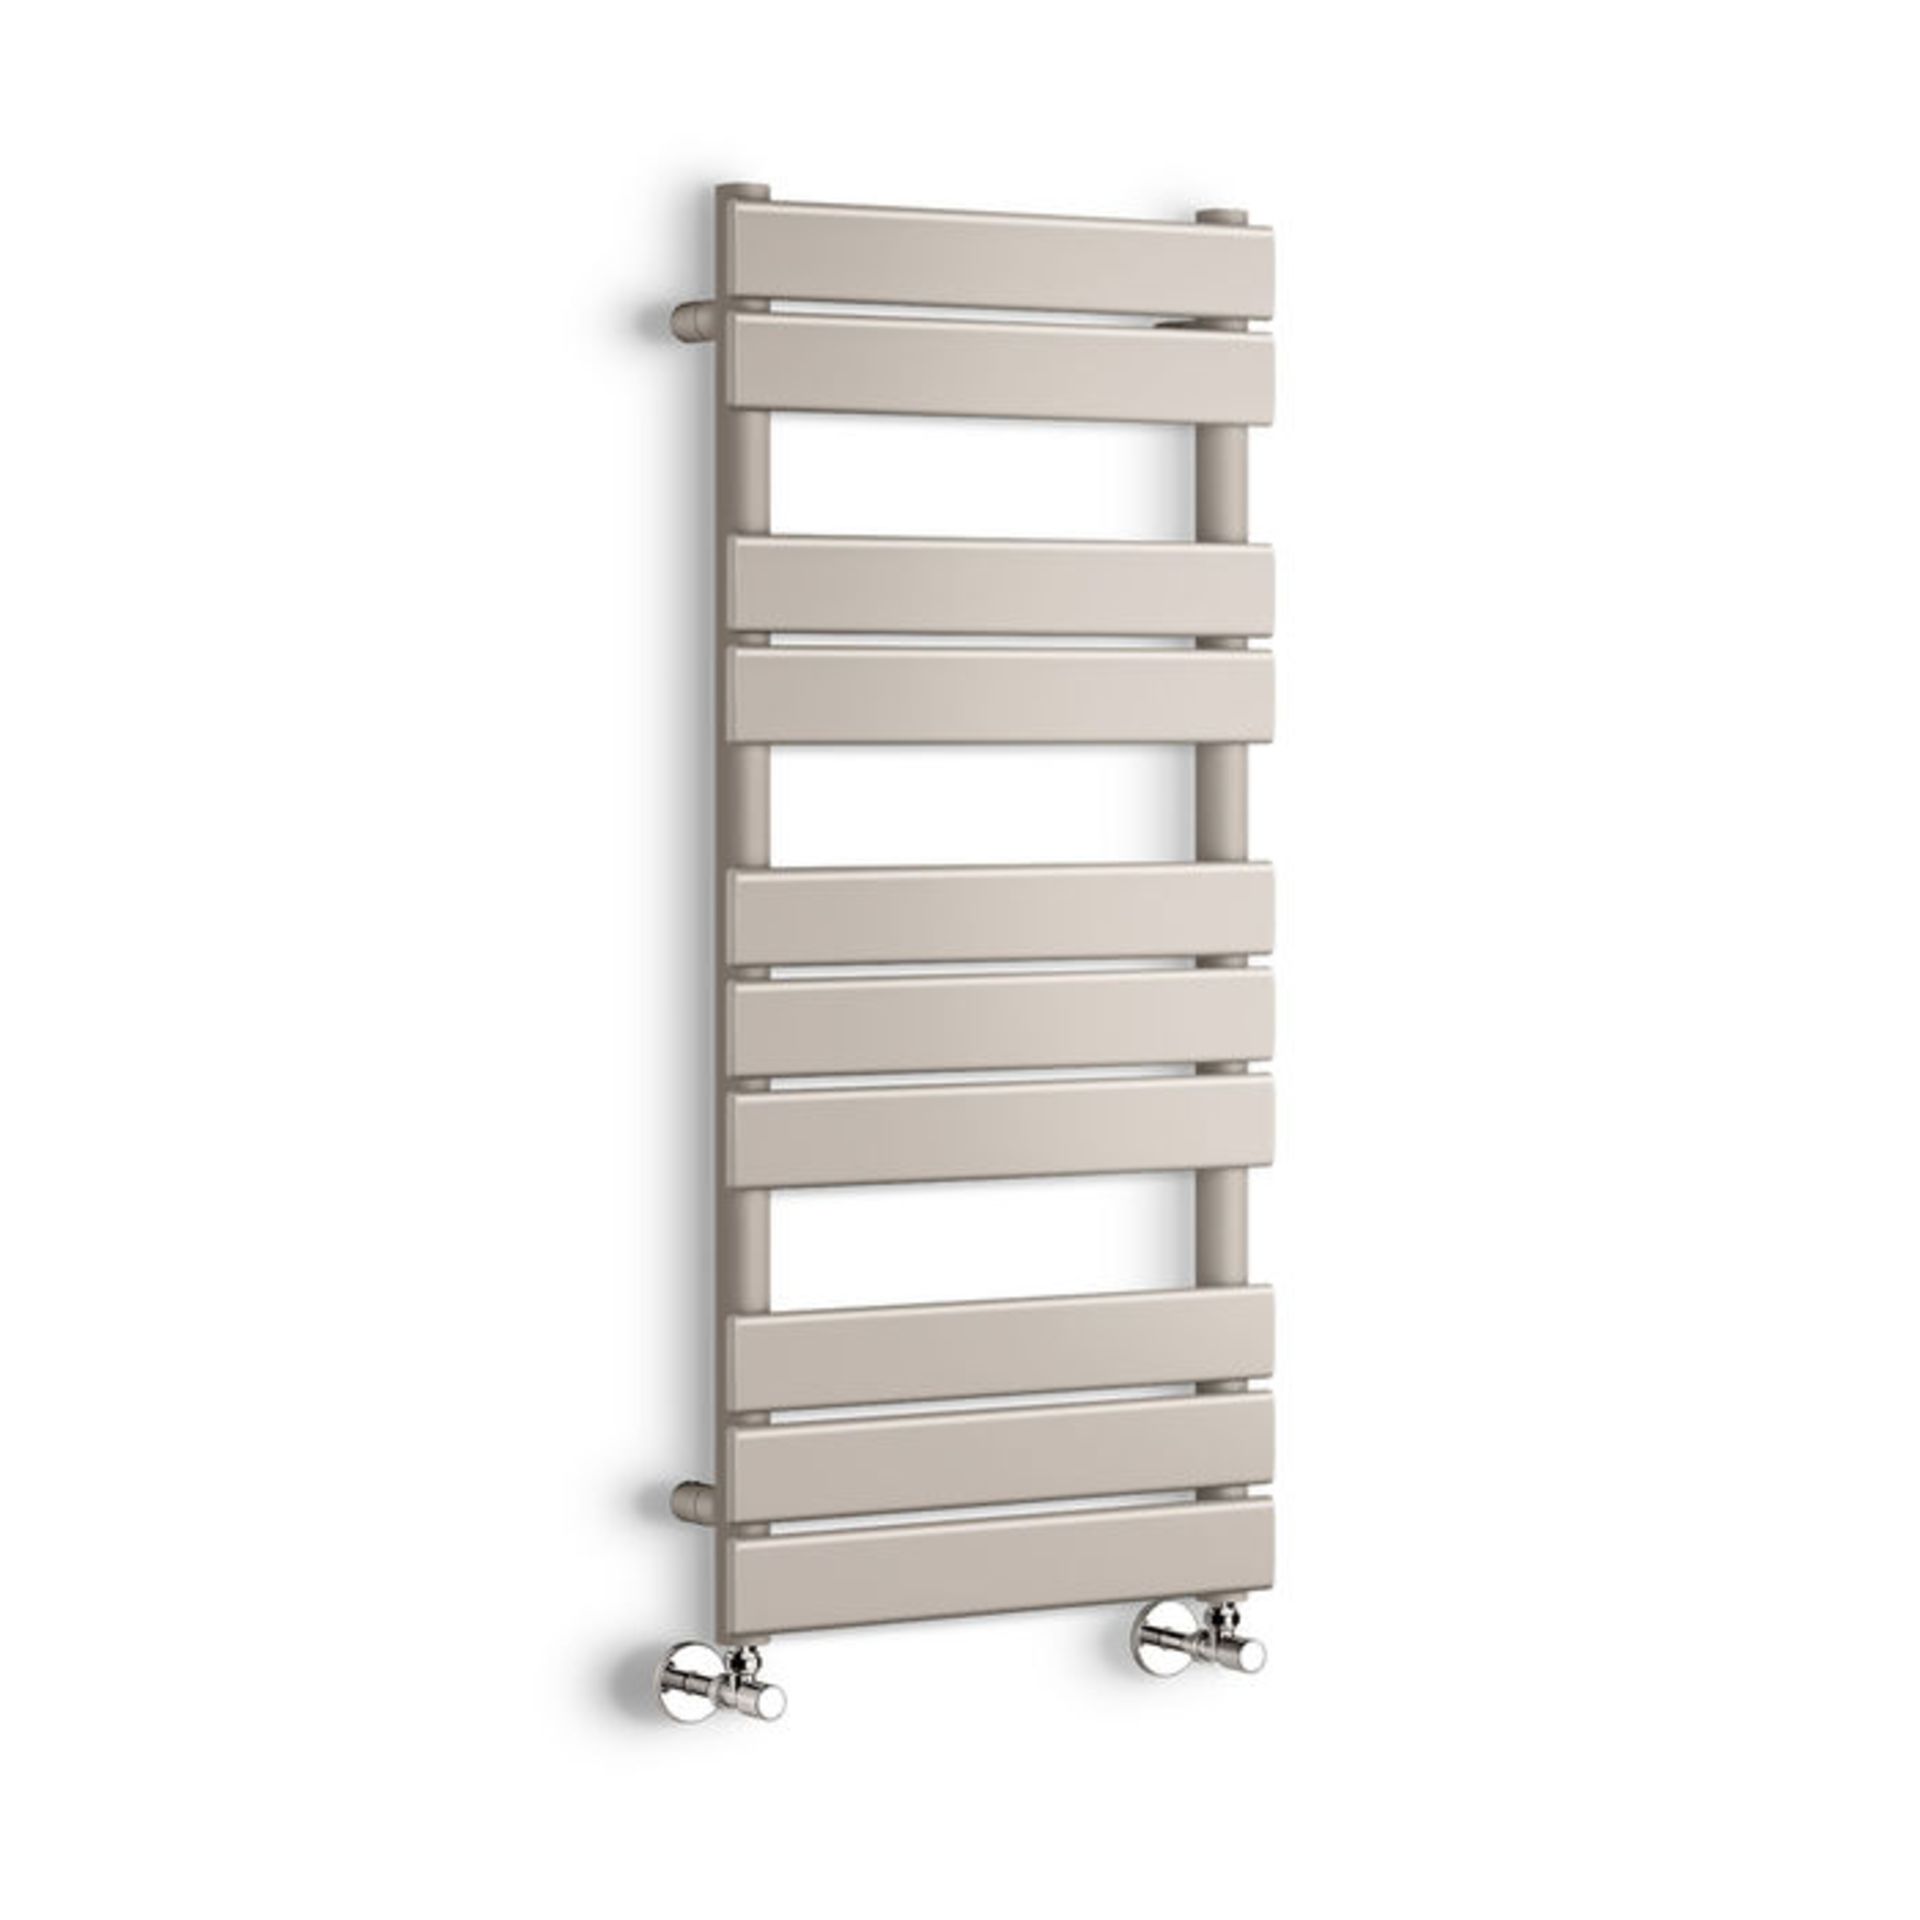 (JM117) 1000x450MM Flat Single towel radiator Cashmere. RRP £299.99. Made from high-quality low- - Image 3 of 3